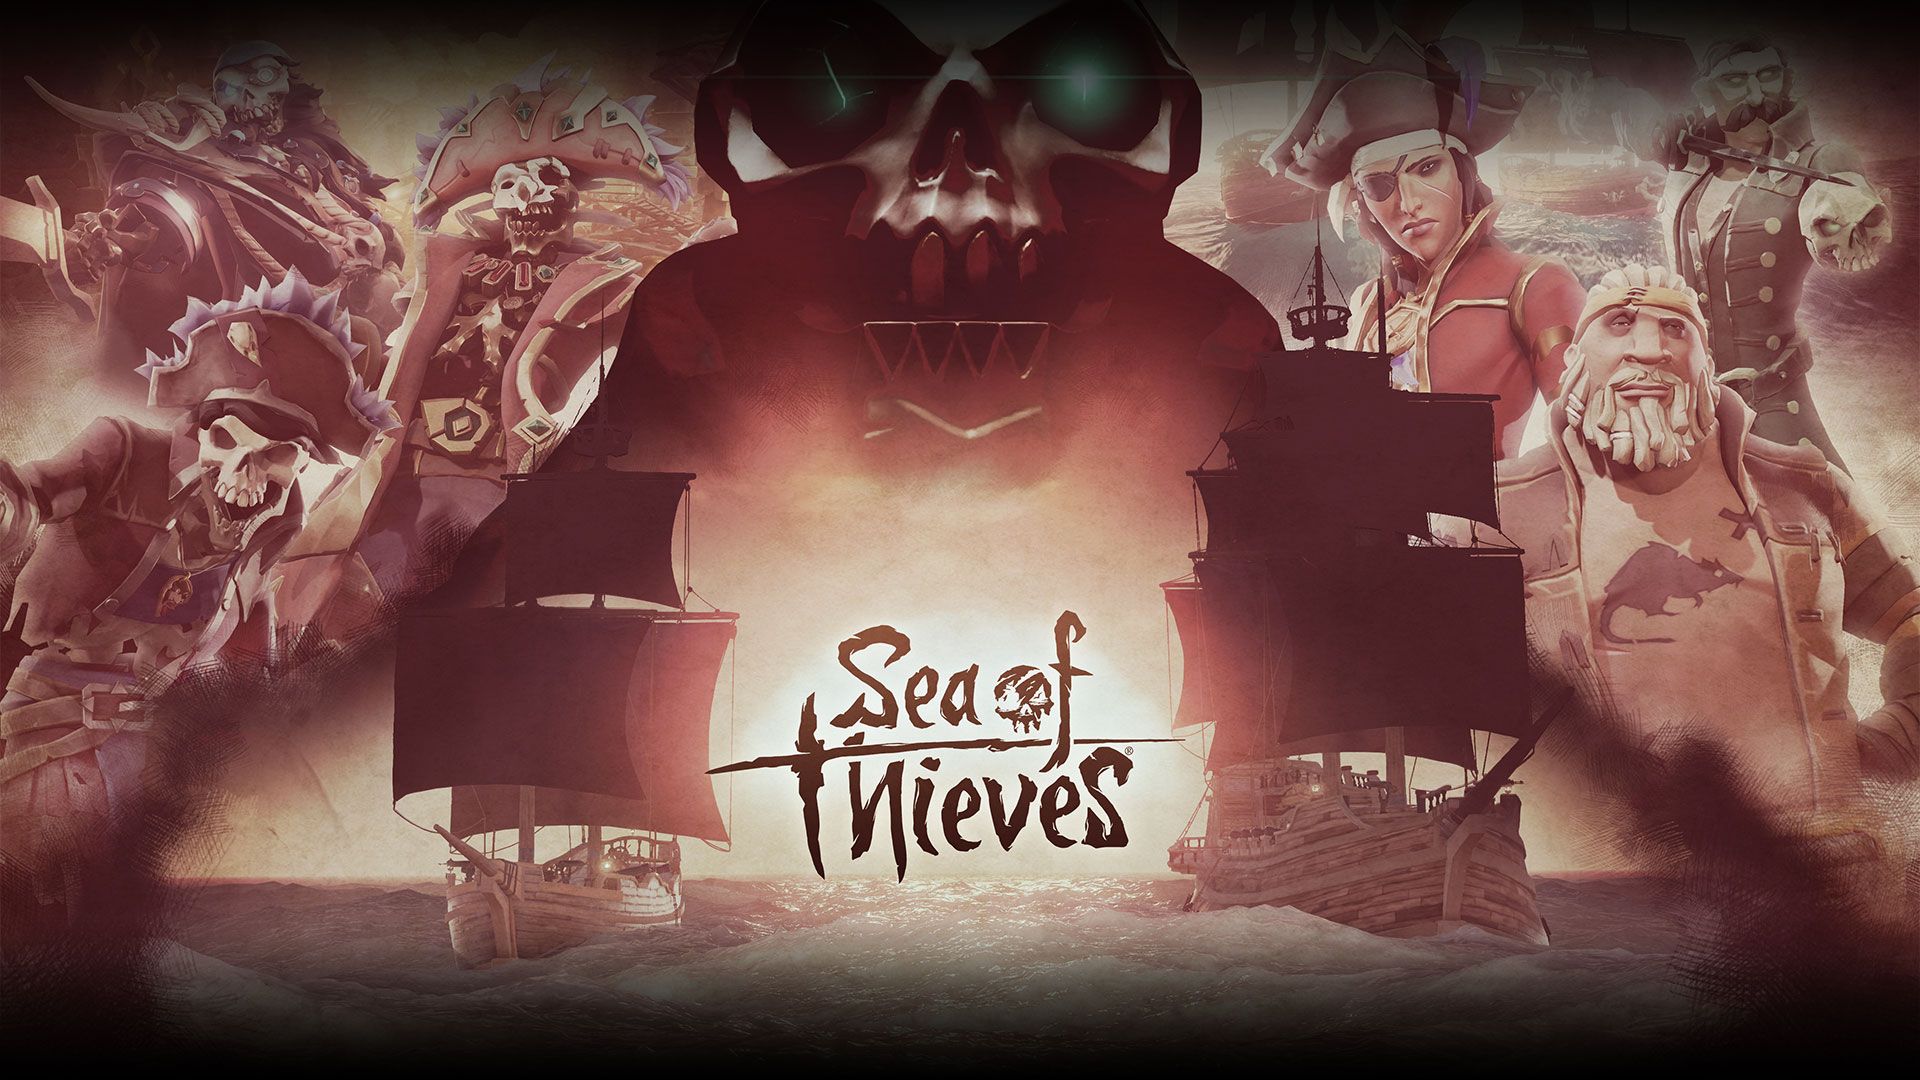 Sea of Thieves for Xbox One, Windows 10 and Steam